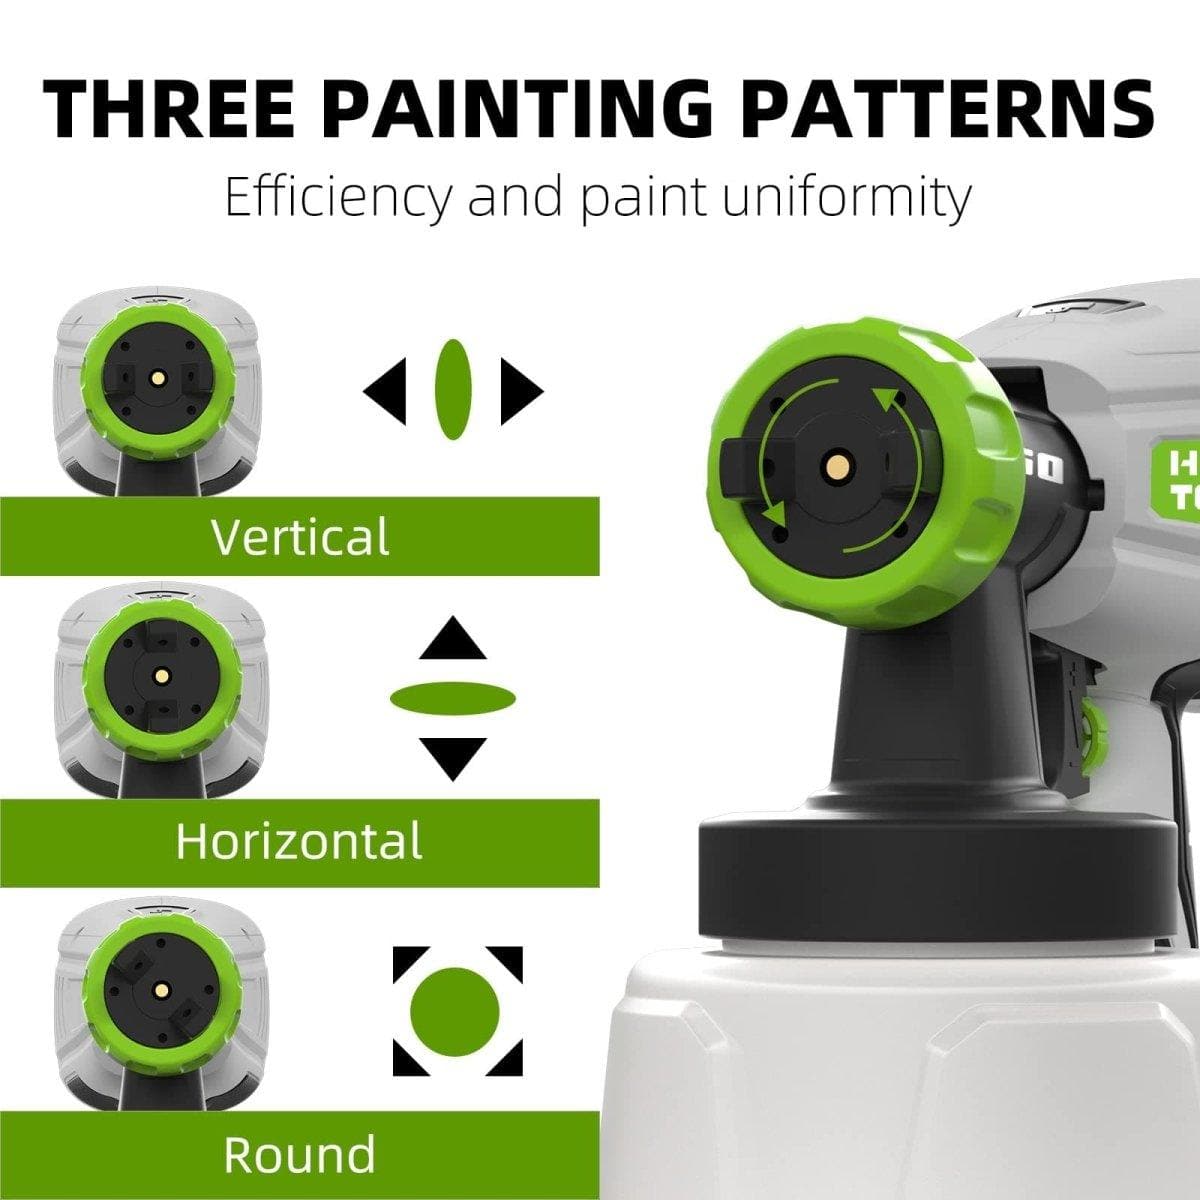 Huepar Tools SG550 HVLP electric paint sprayer with 1000ml capacity and 4 metal nozzles, 3 patterns for home interior and exterior walls, ceiling, cabinet, fence, and chair3